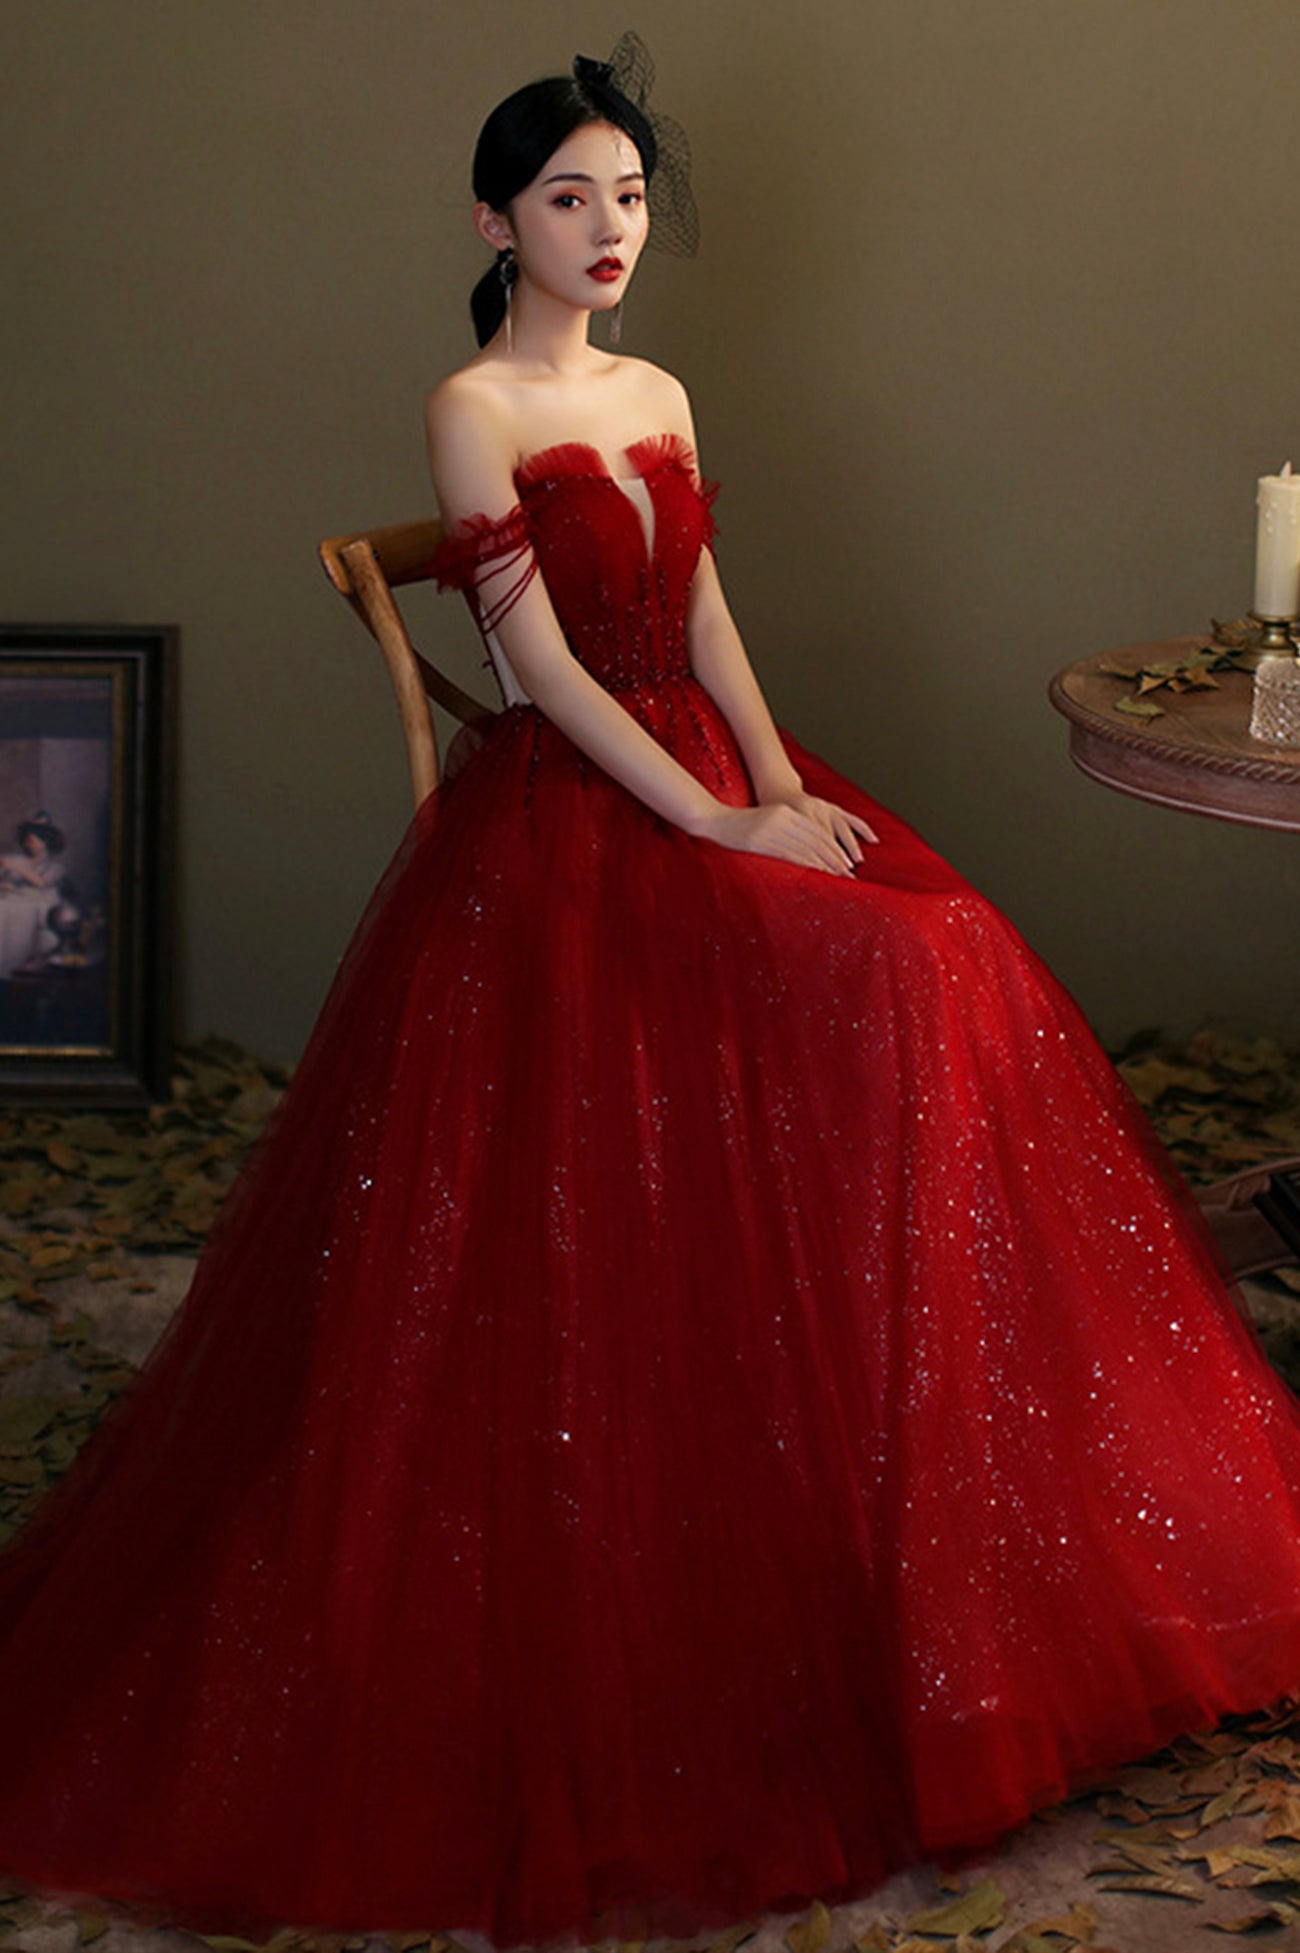 Long Sleeves Beaded Evening Dresses Party Elegant Gowns Red Tulle Ball Gown  Women Fashion A Line Flo on Luulla